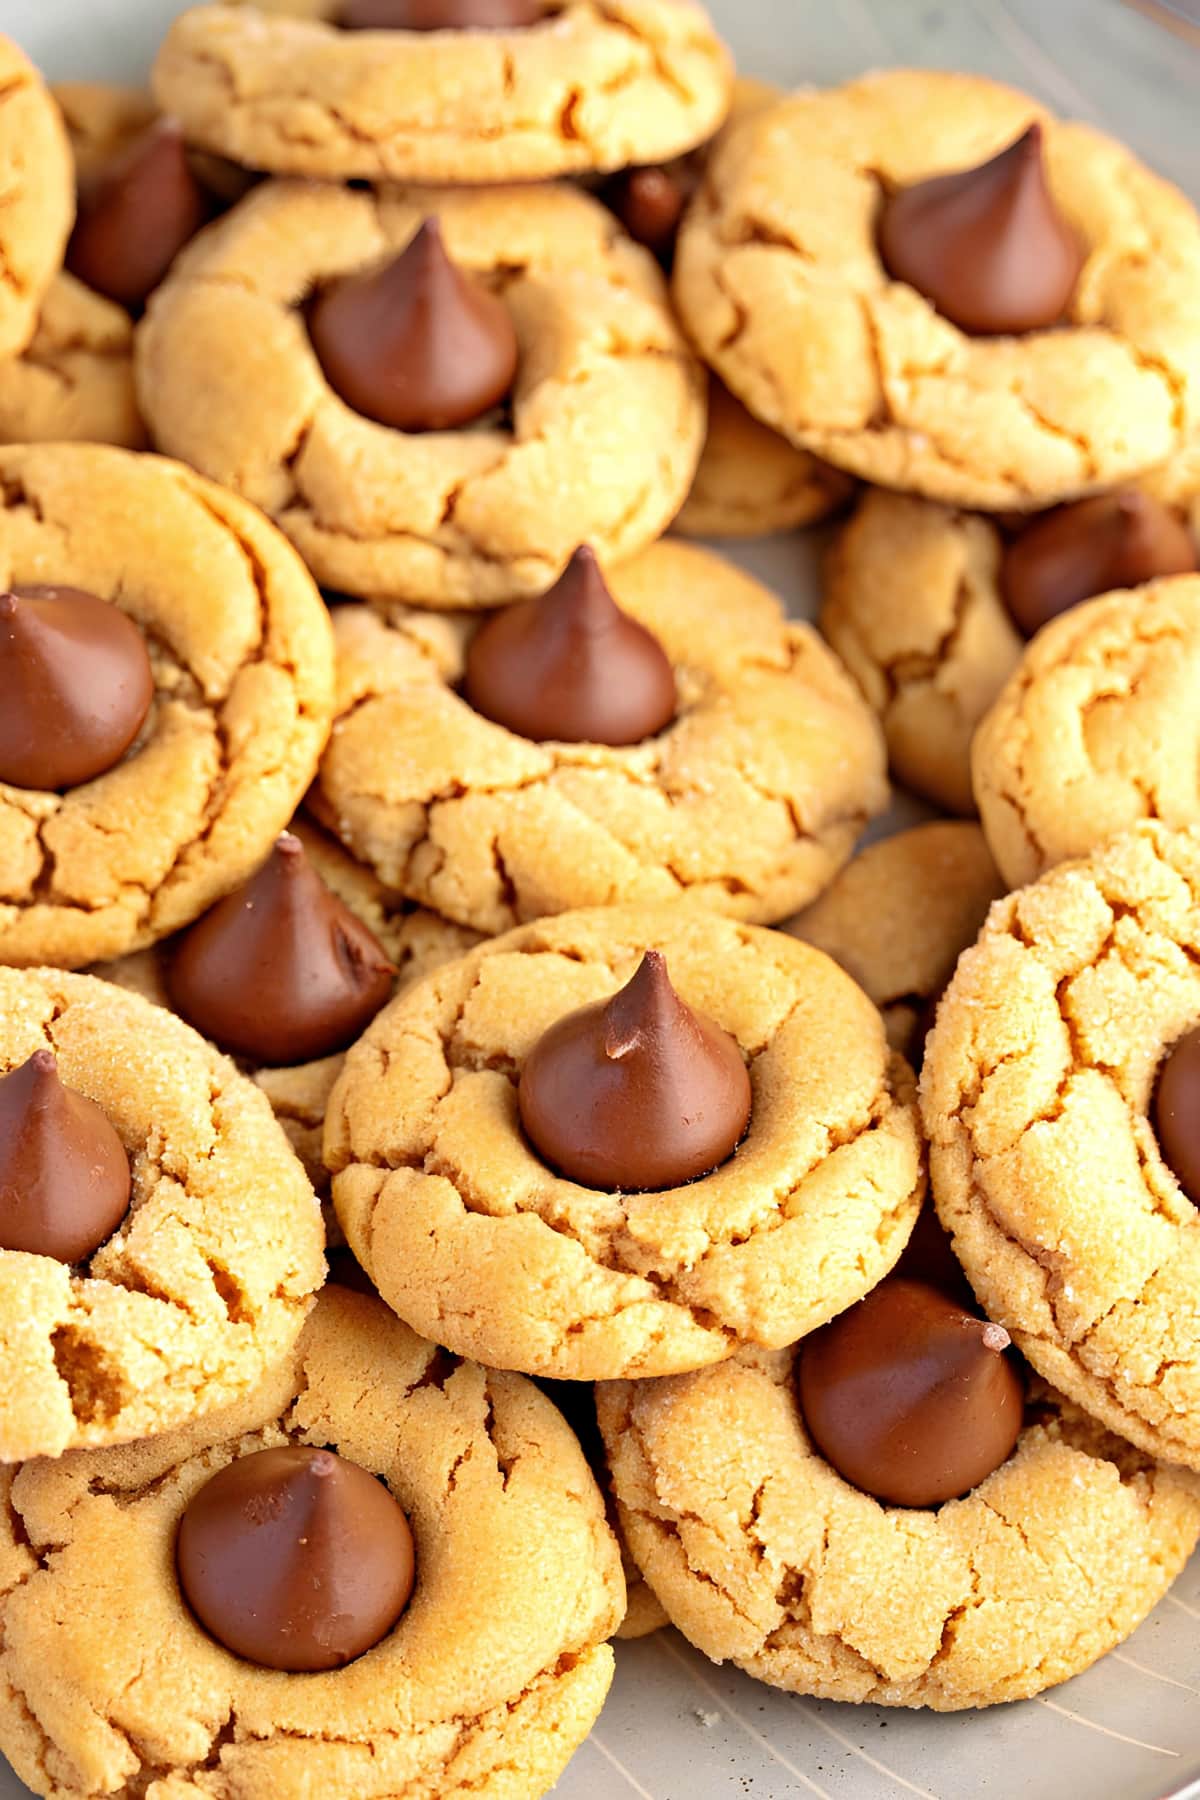 Homemade Soft and Chewy Peanut Butter Blossoms